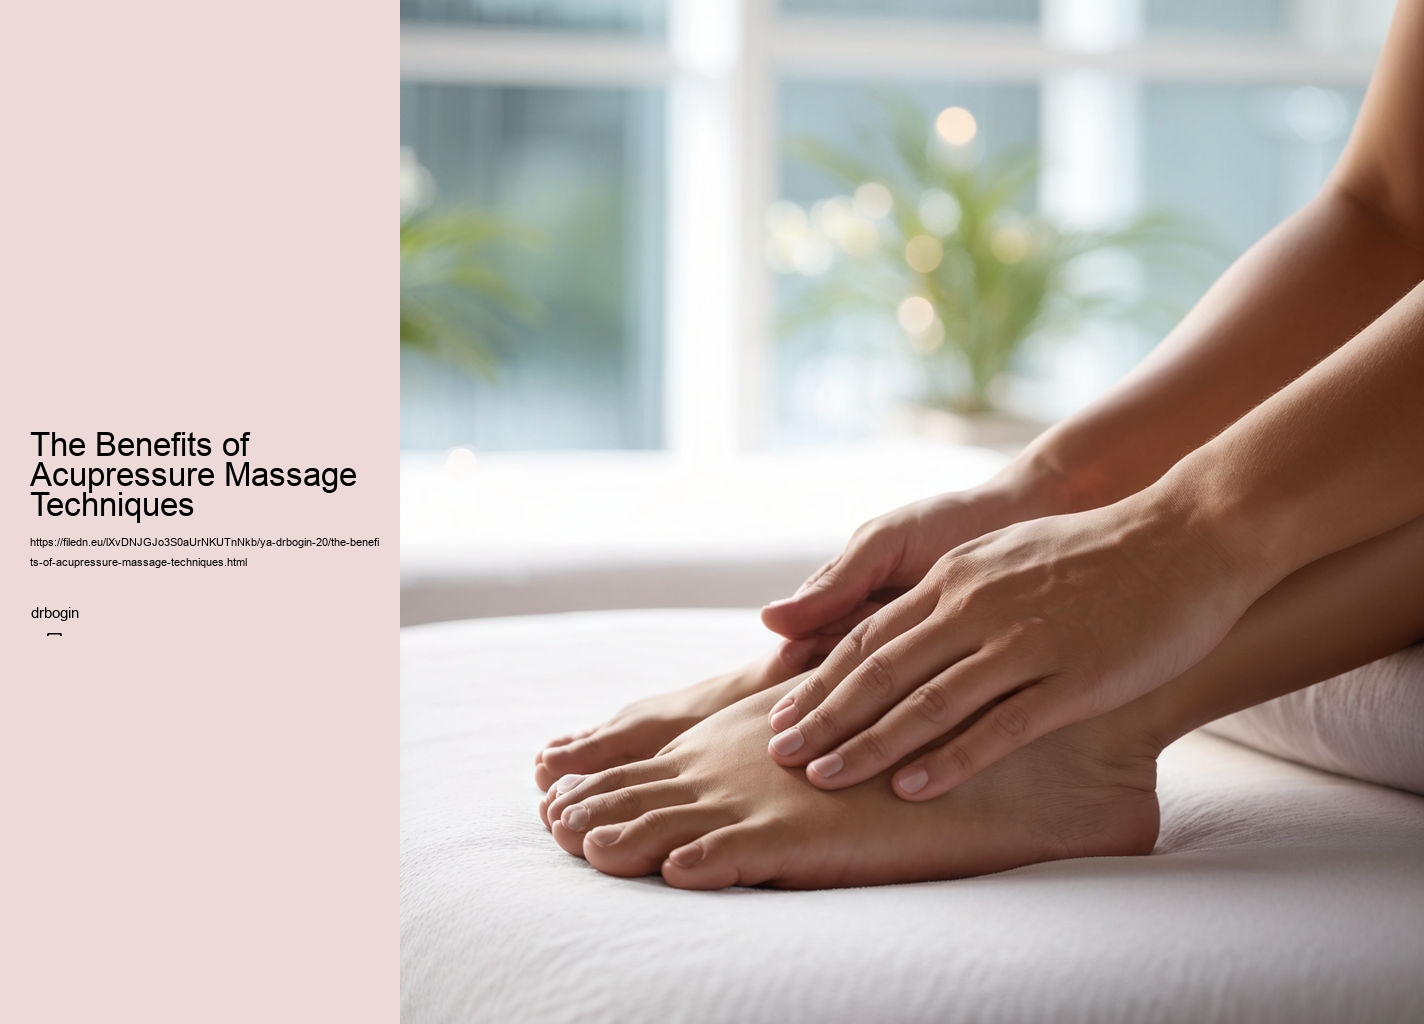 The Benefits of Acupressure Massage Techniques